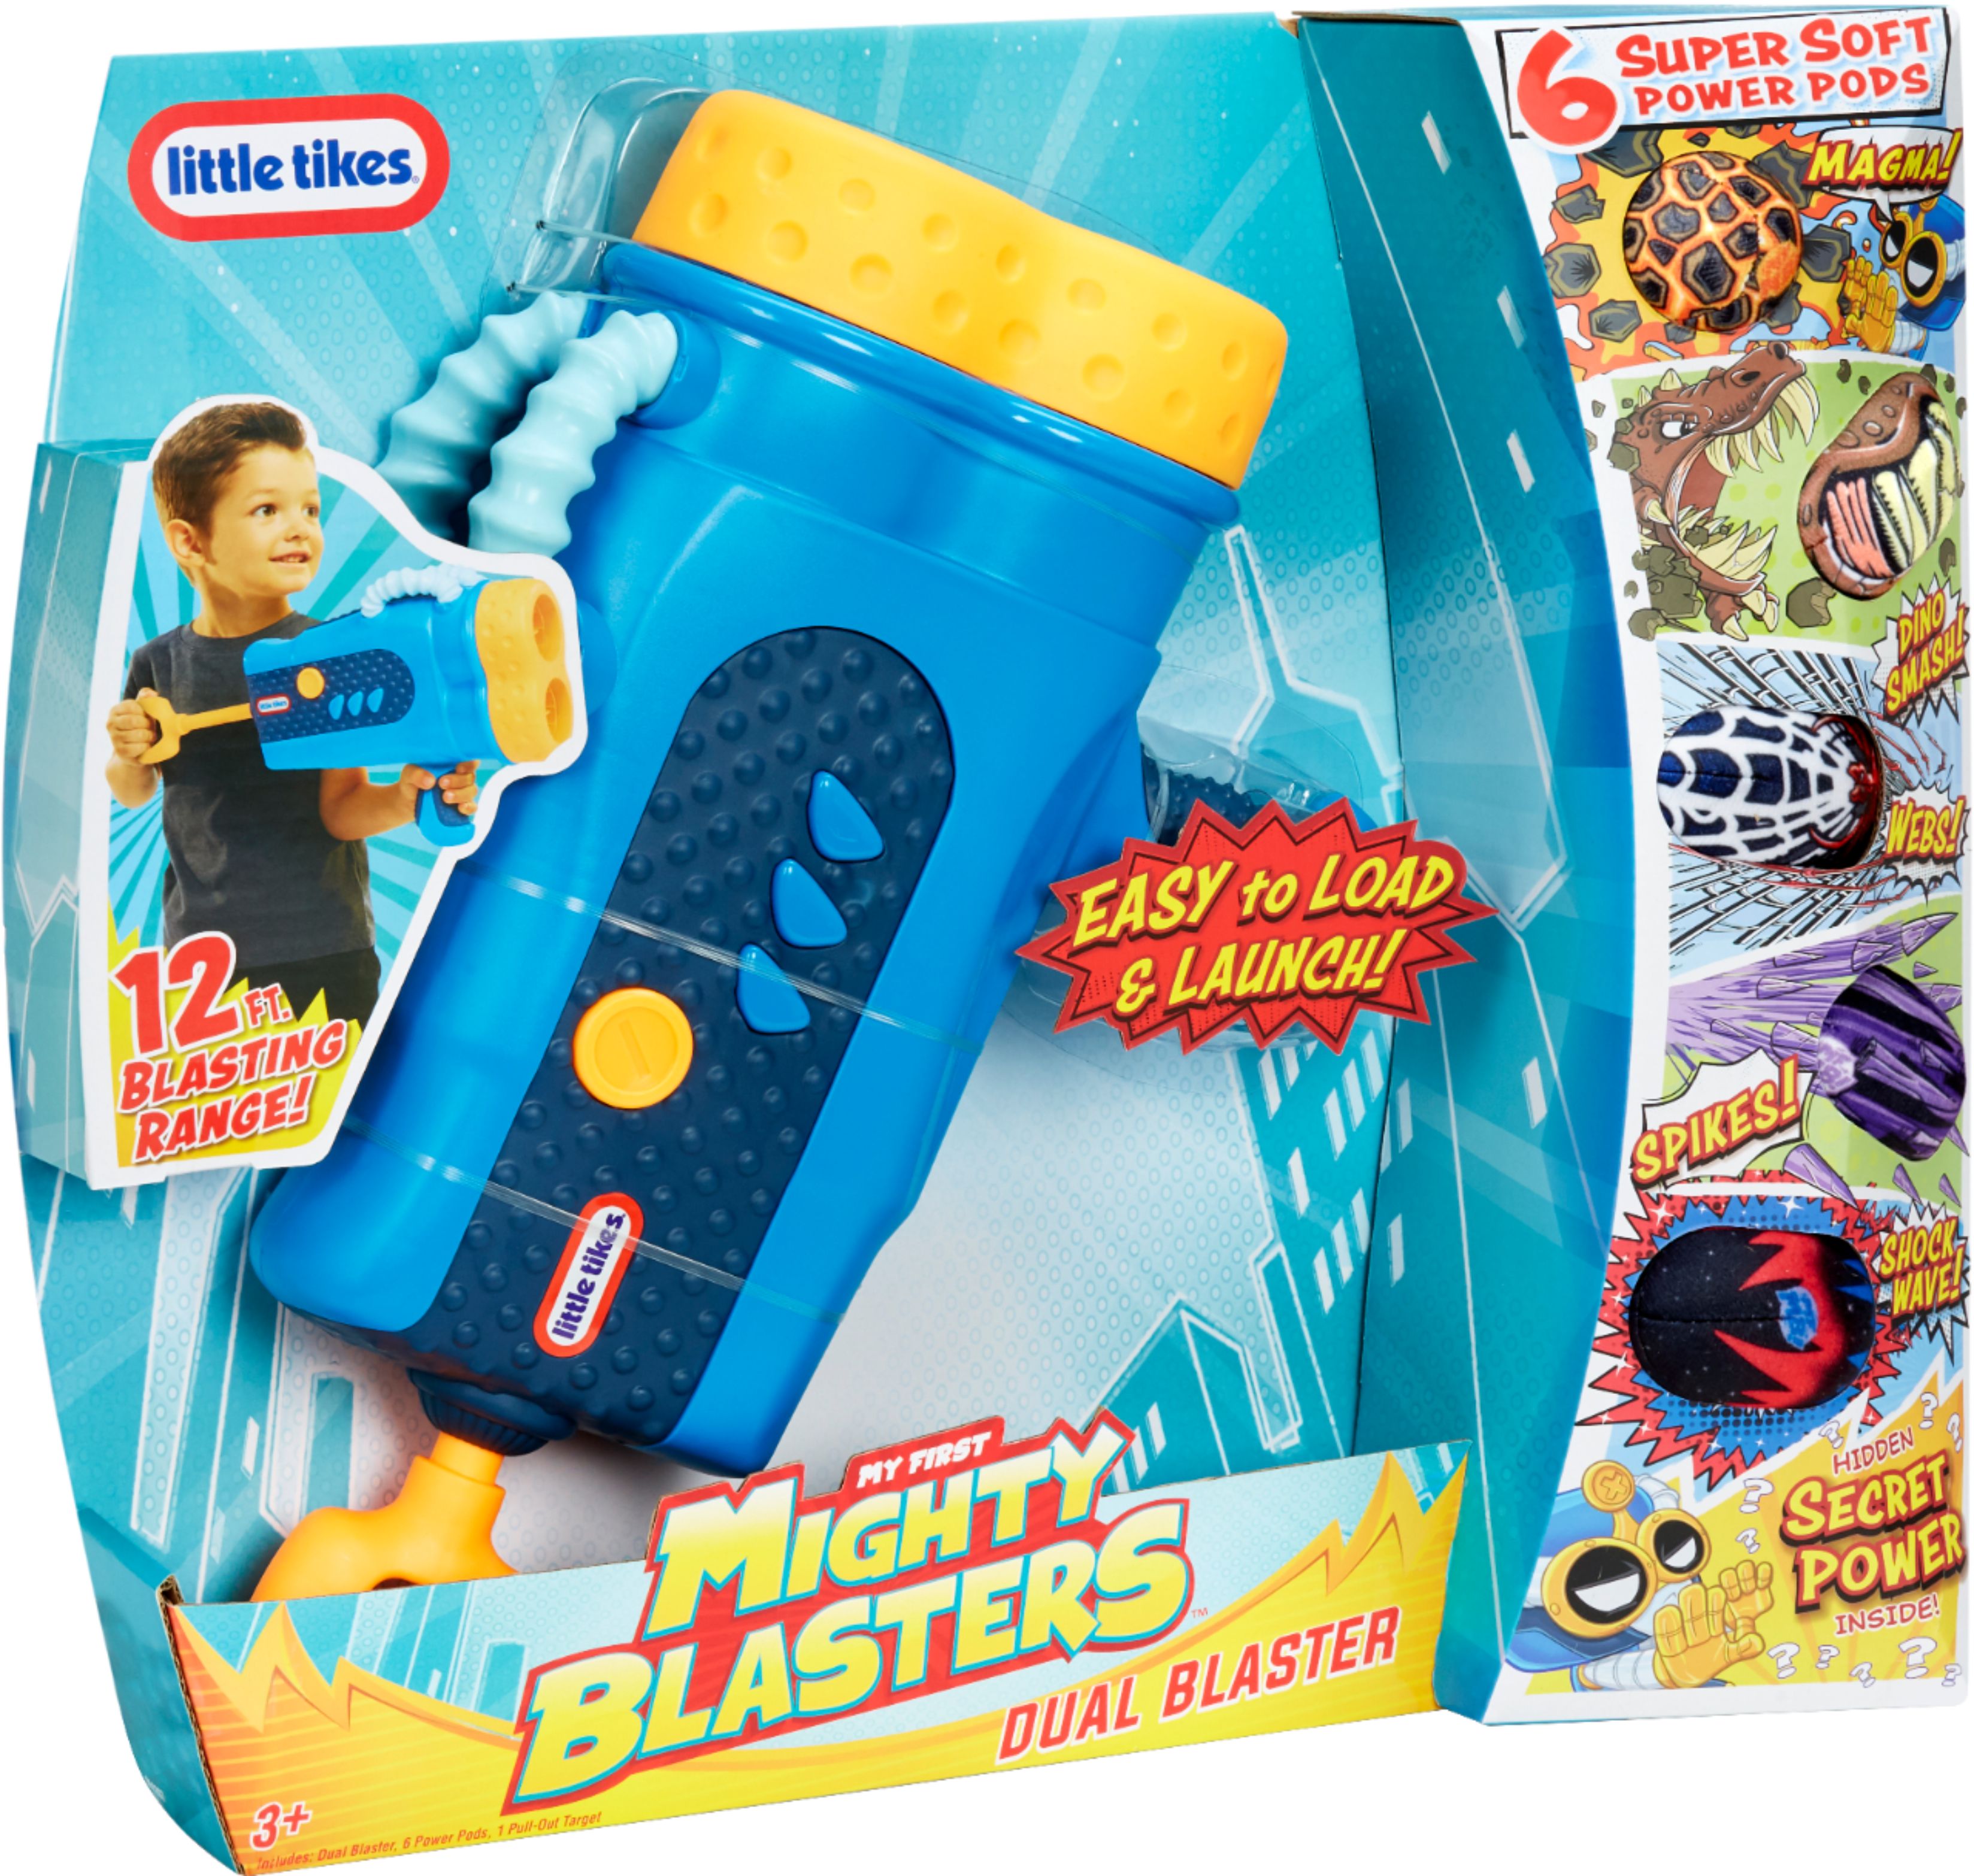 Angle View: Little Tikes Mighty Blasters Dual Blaster Toy Blaster with 6 Soft Power Pods, 12' Range - For Kids & Toddlers, Boys & Girls Ages 3 4 5+